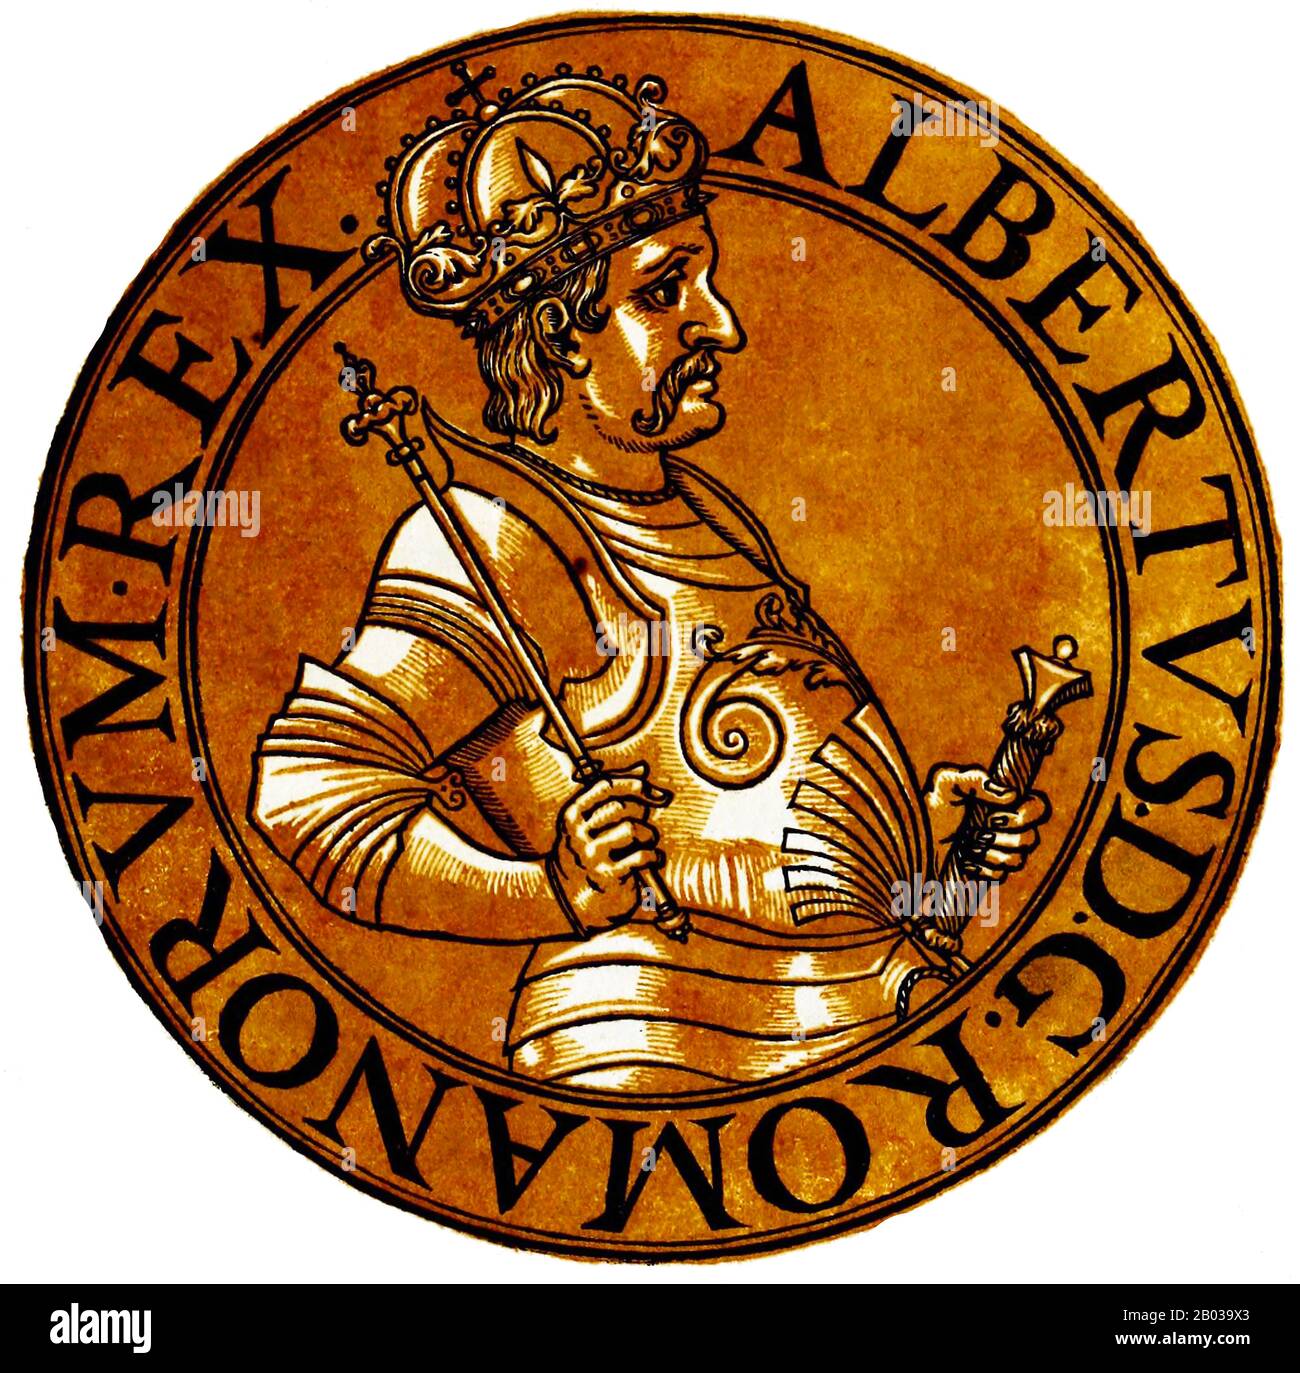 Albert II (1397-1439), also known as Albert of Germany and Albert the Magnanimous, was the son of Albert IV, Duke of Austria, succeeding his father at the age of seven in 1404, though he did not become the proper governor of Austria until 1411. Albert married Elisabeth of Luxembourg, heiress of Emperor Sigismund, in 1422.  Albert assisted his father-in-law during the Hussite Wars, and was in turn named as successor in 1423. When Sigismund died in 1437, Albert was crowned King of Hungary a year later. He was crowned King of Bohemia six months afterwards, though he did not obtain actual possessi Stock Photo